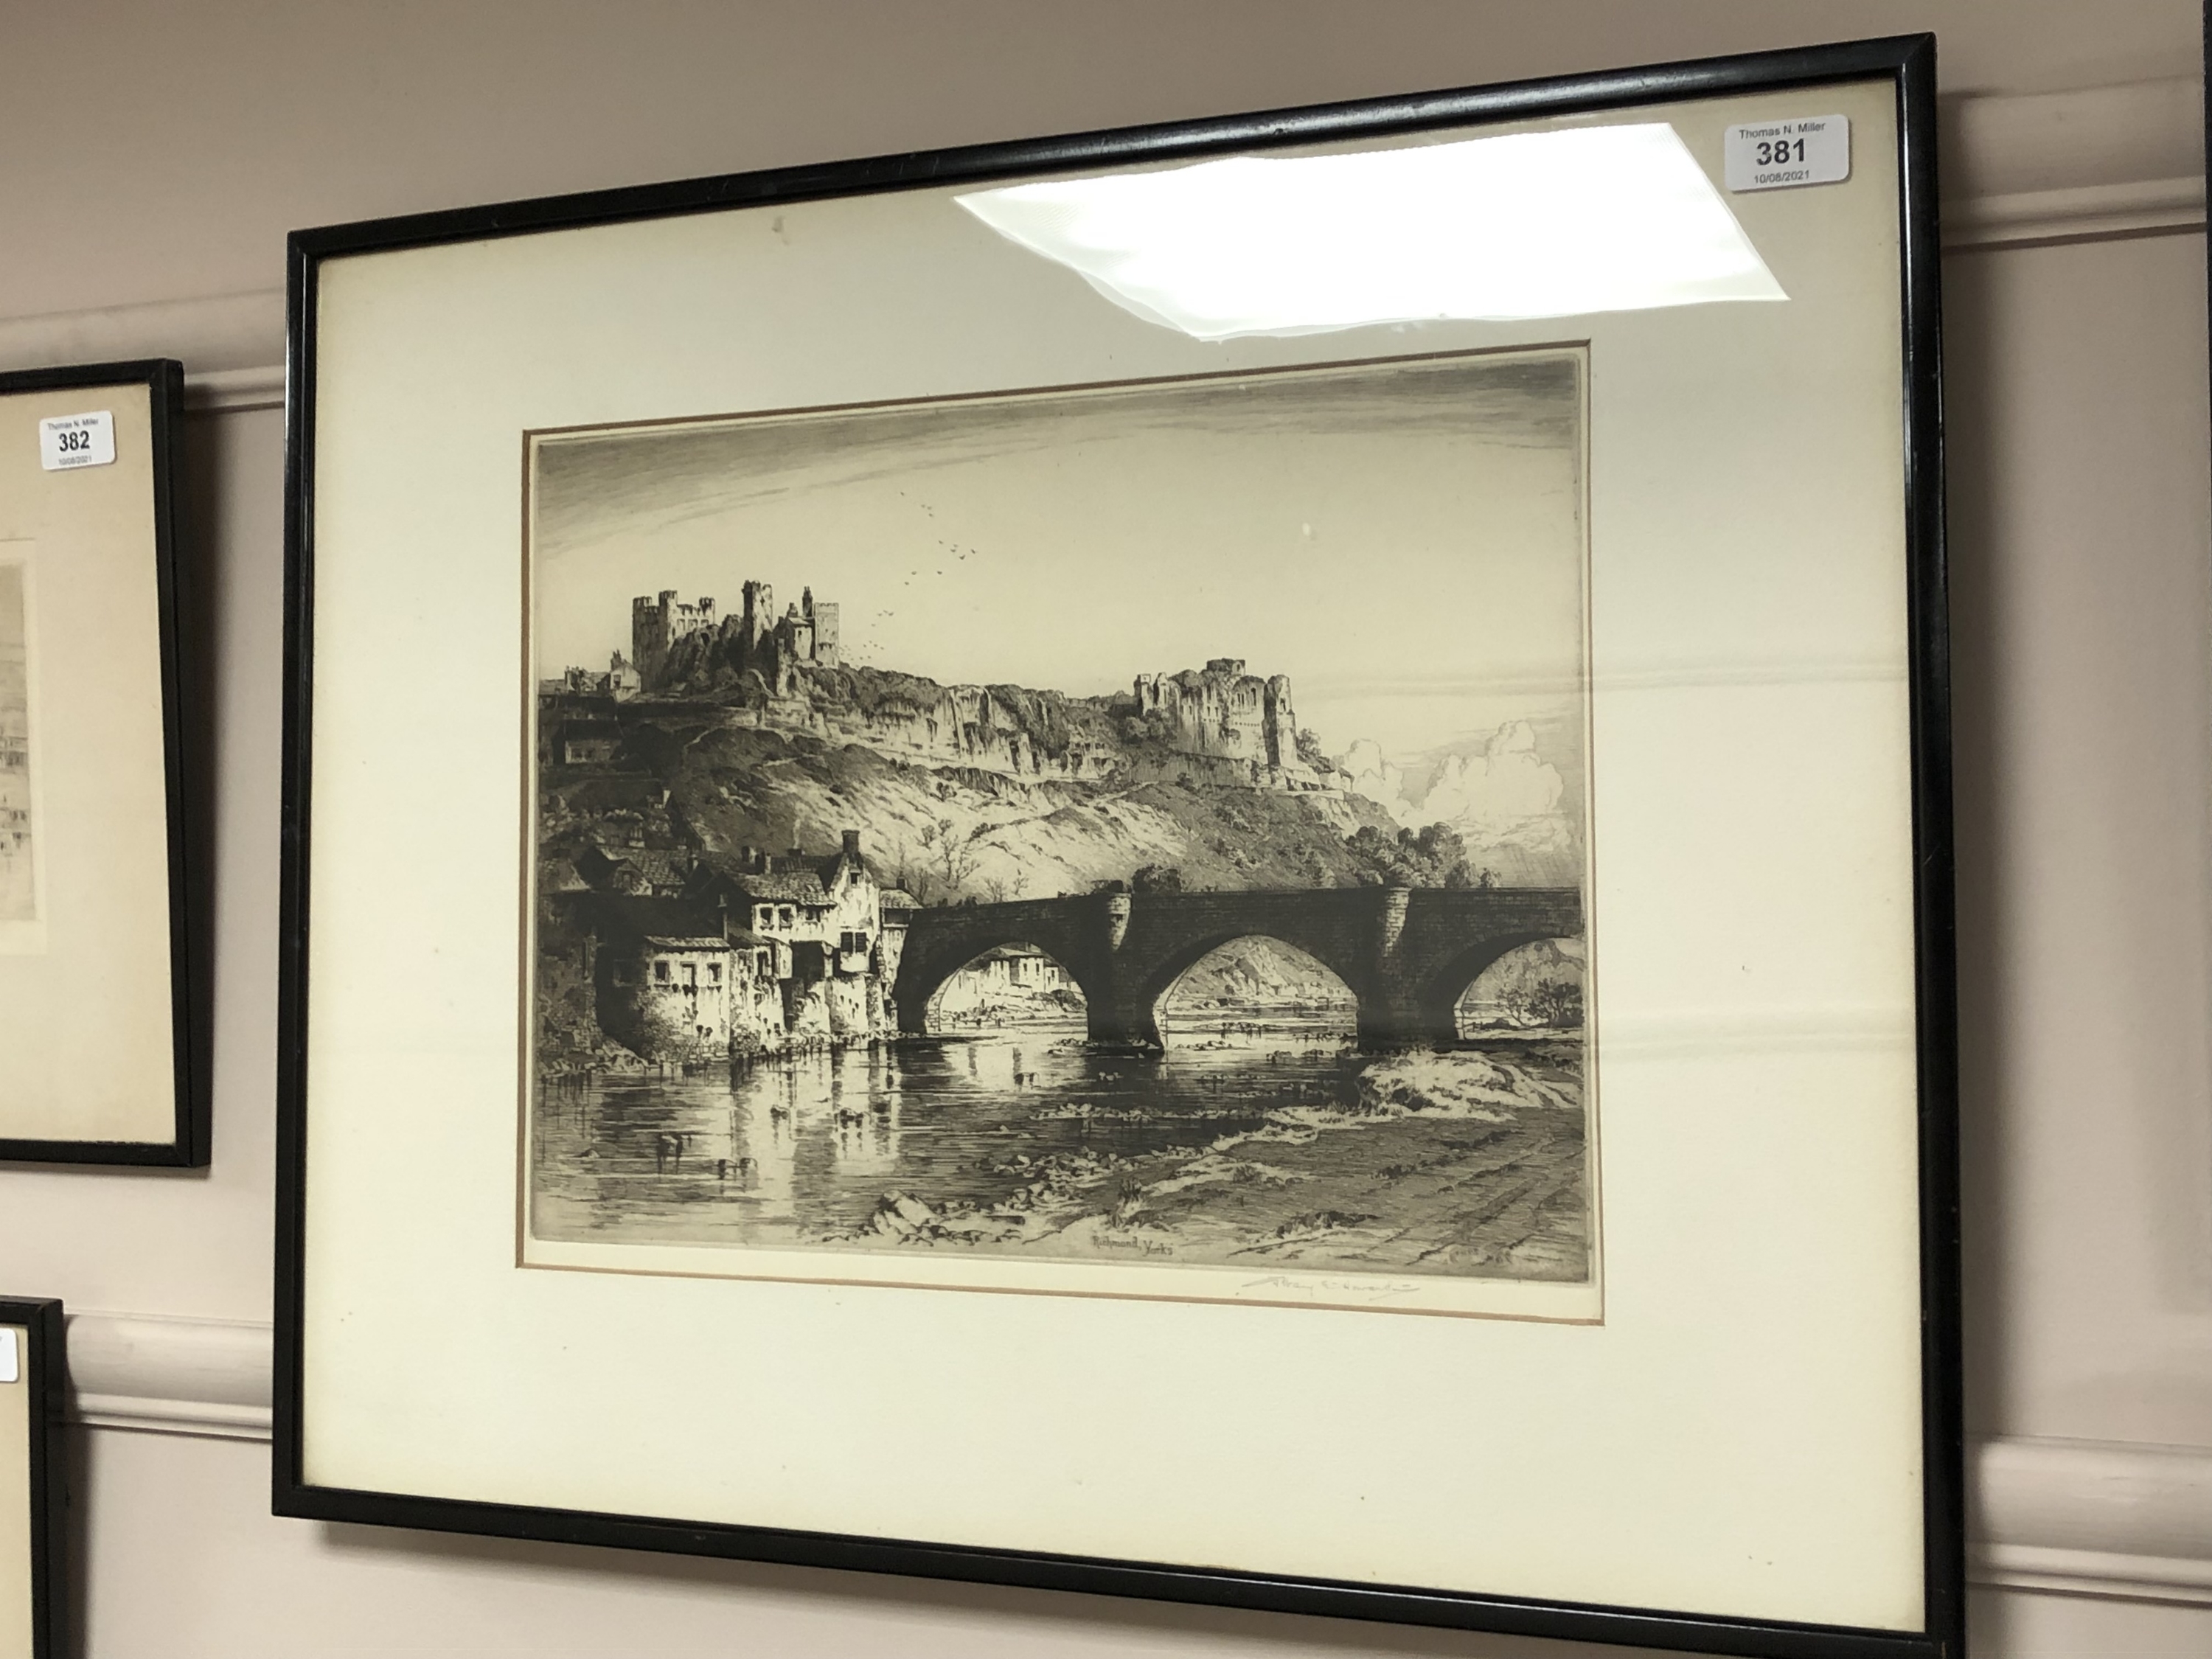 Albany Howarth, "Richmond Castle, Yorks", drypoint etching, signed in pencil, with margins,